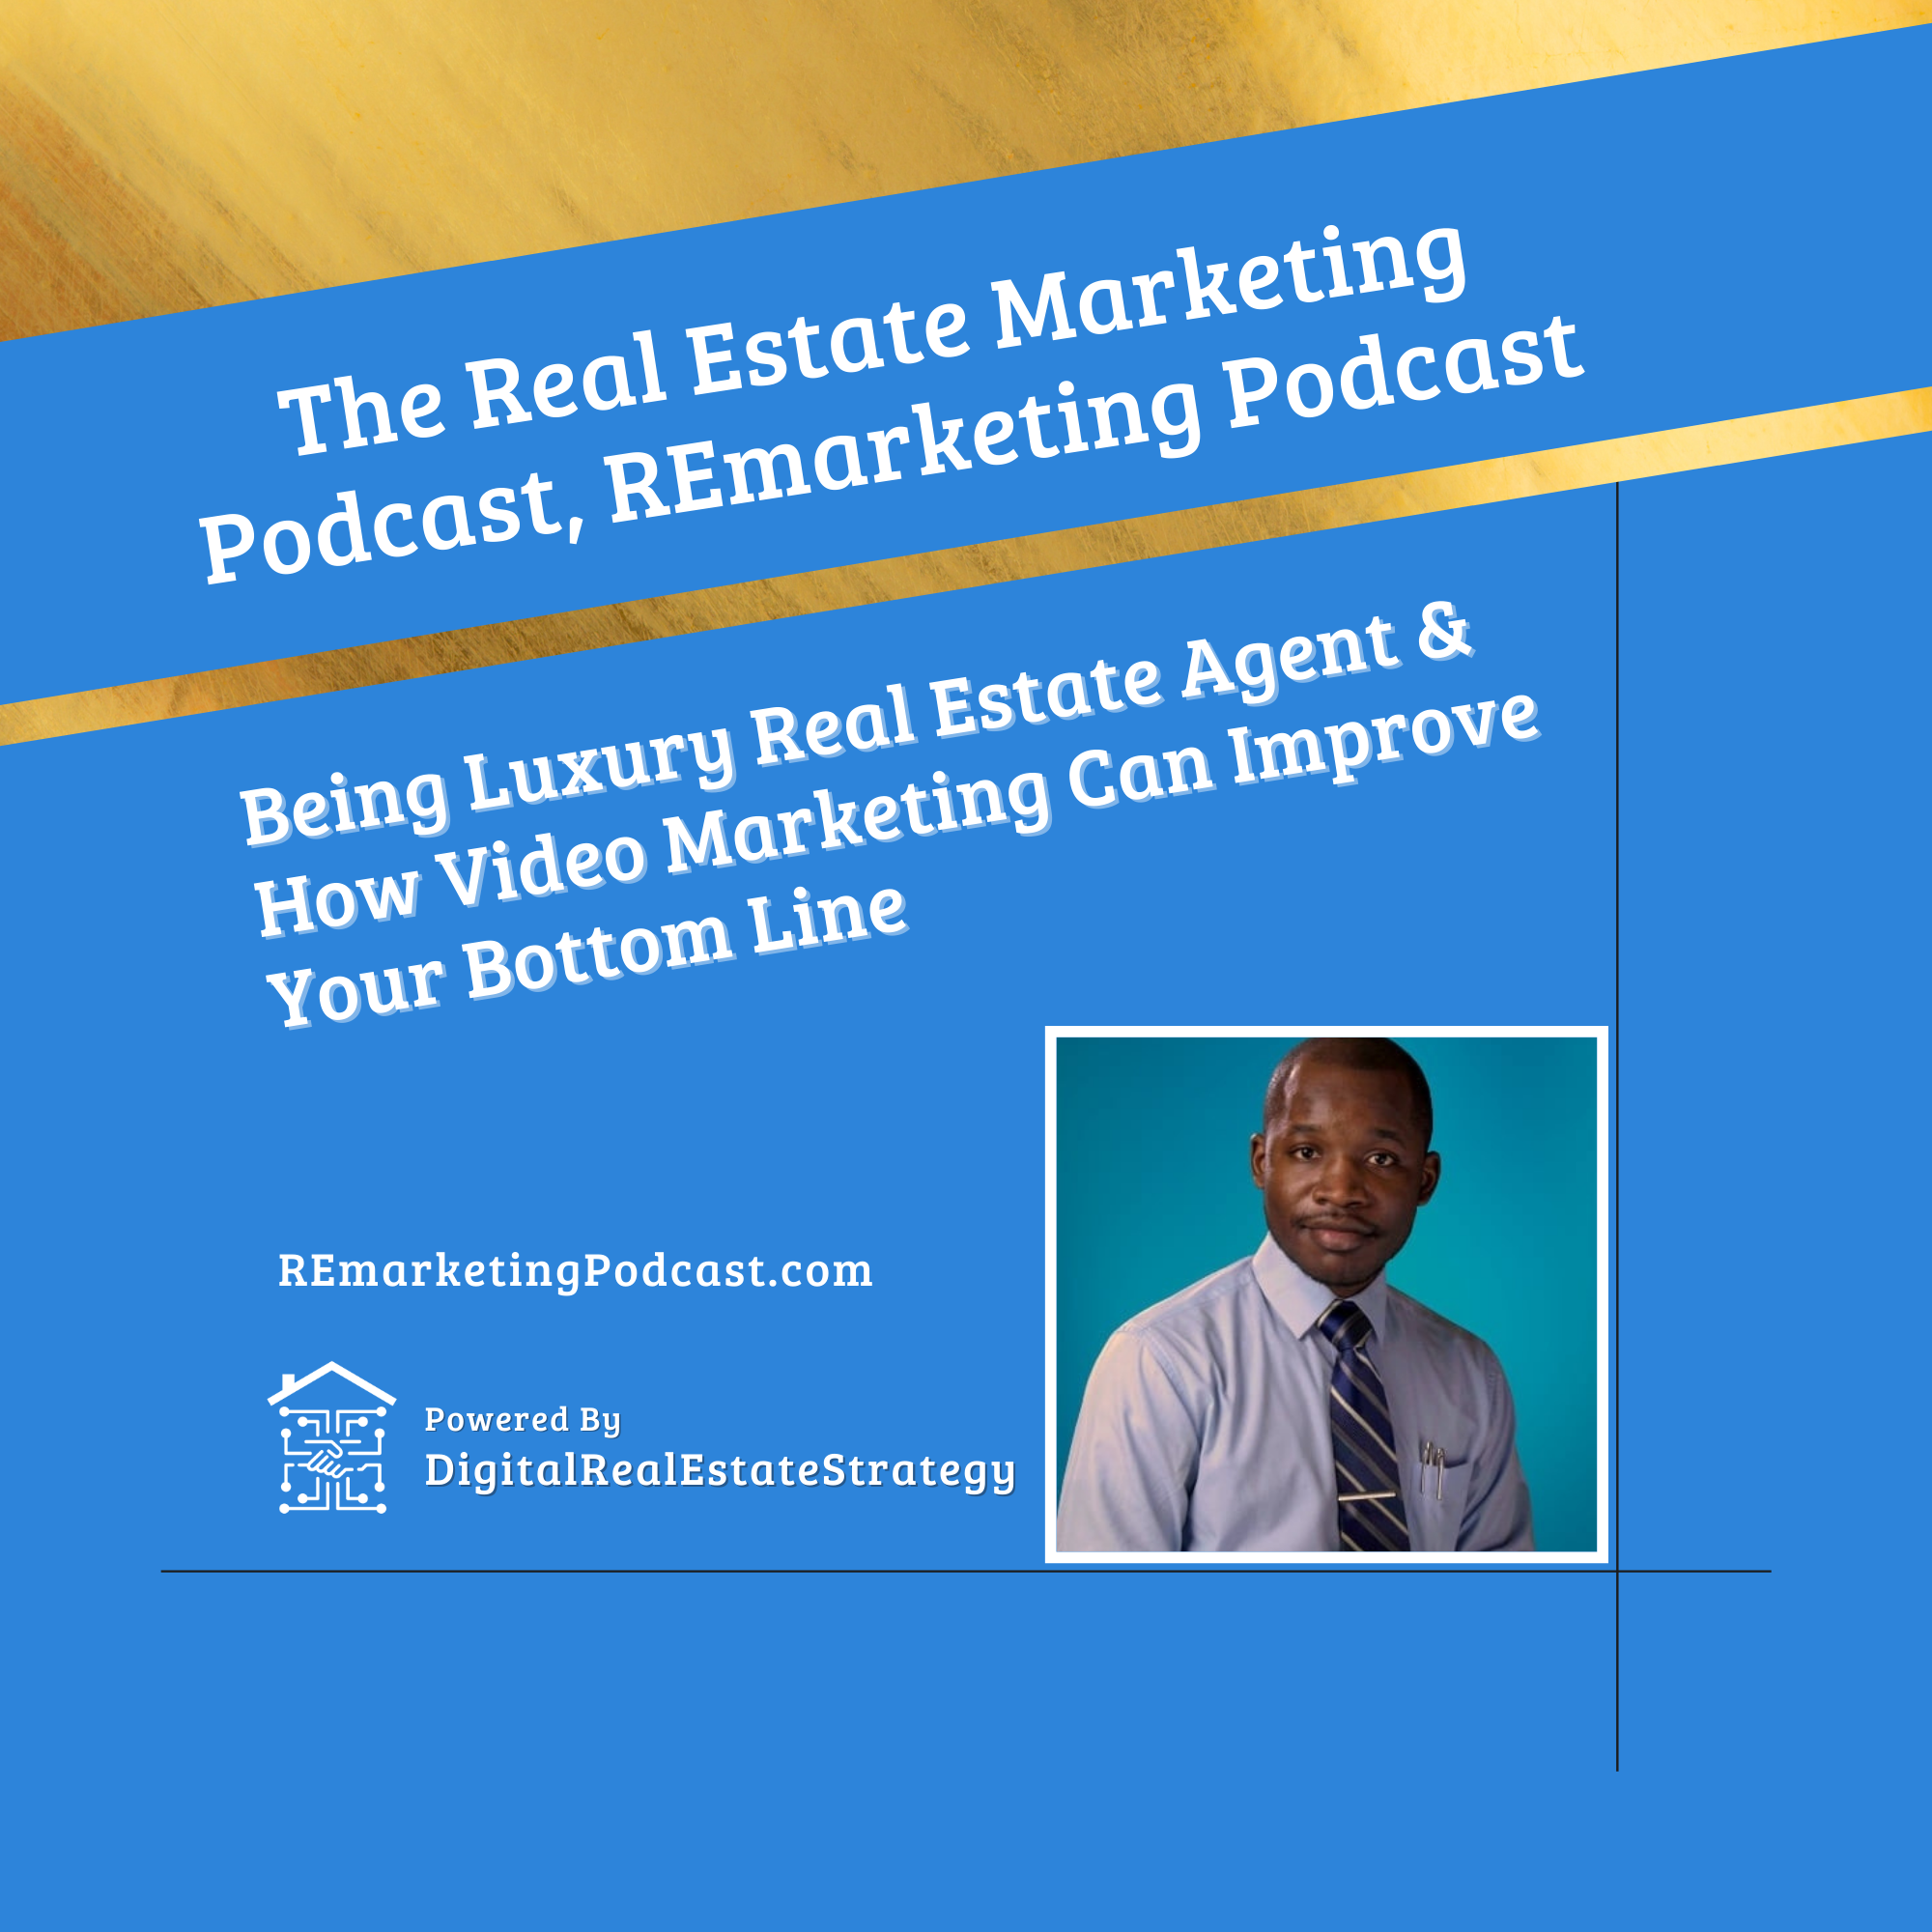 Artwork for podcast The Real Estate Marketing Podcast, REmarketing Podcast